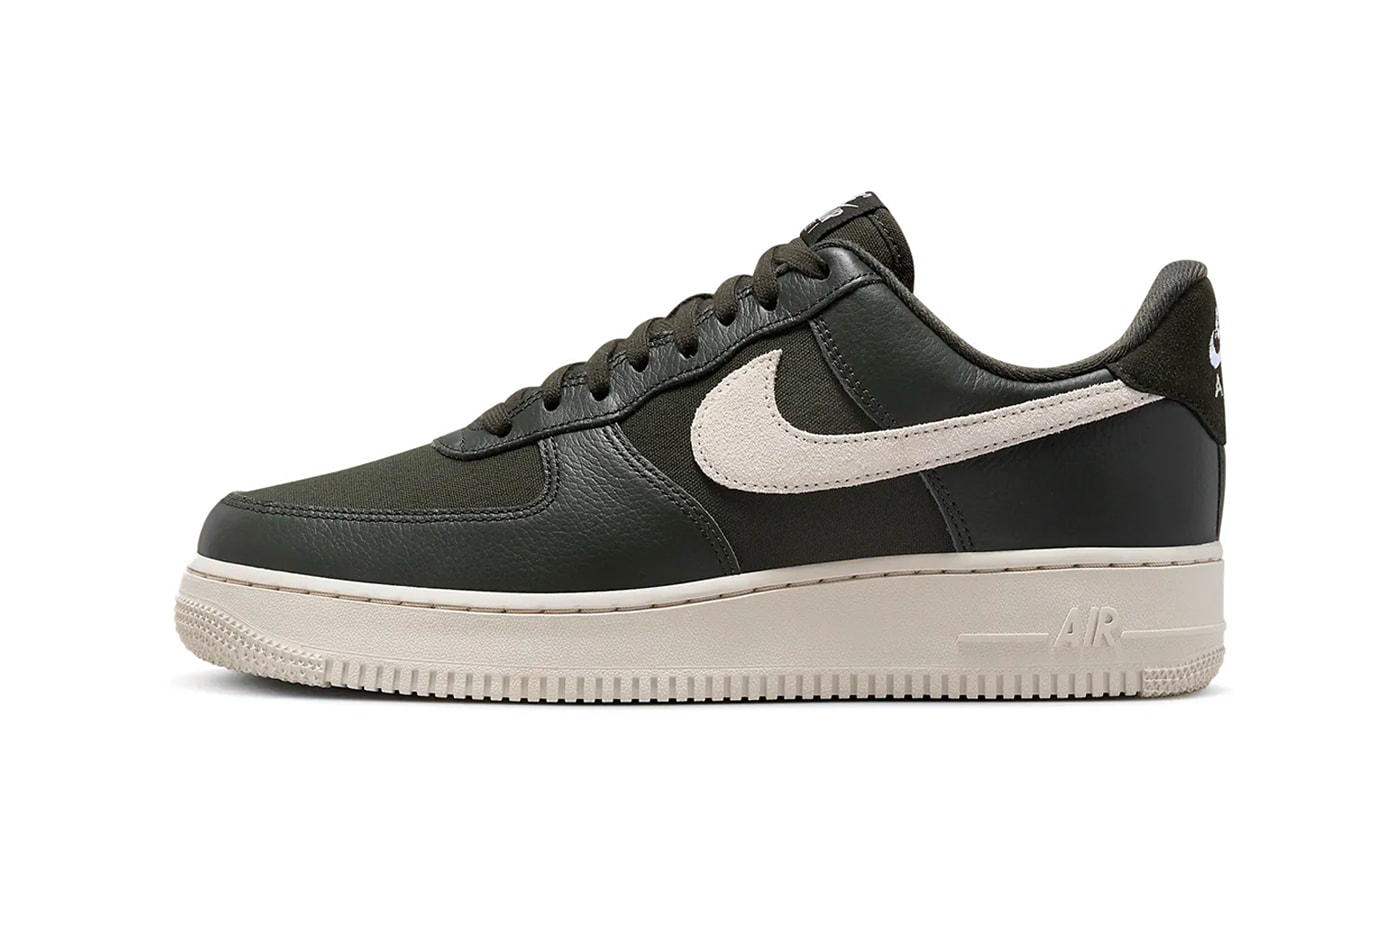 Nike Air Force 1 Low "Sequoia" Has an Official Release Date DV7186-301 Release Info swoosh af1